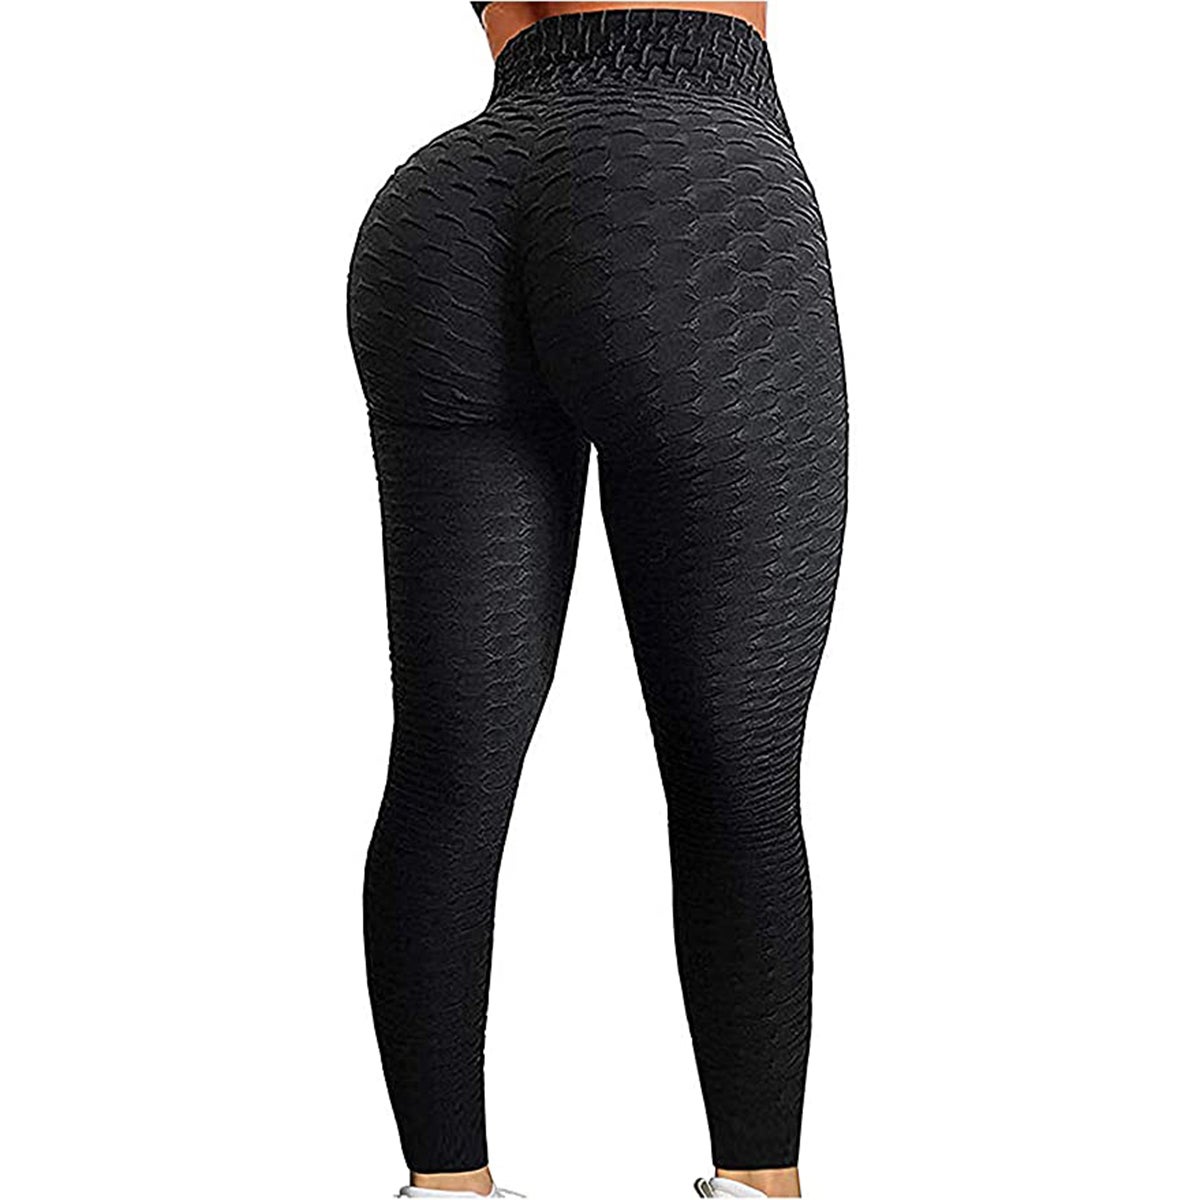 Lizzo Tried The Booty Lifting Amazon Leggings That Went Viral On Tiktok